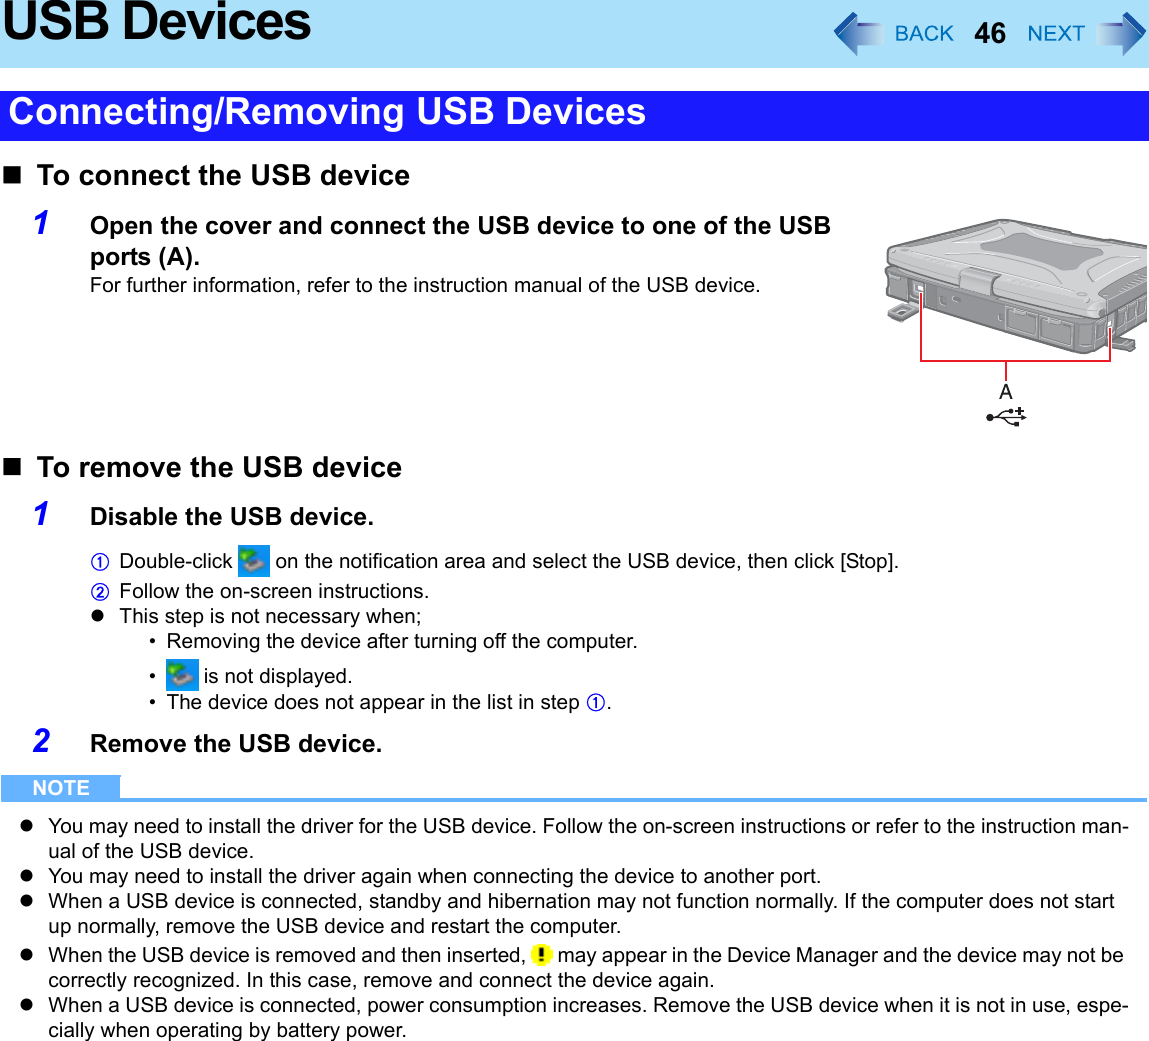 46USB DevicesTo connect the USB device1Open the cover and connect the USB device to one of the USB ports (A).For further information, refer to the instruction manual of the USB device.To remove the USB device1Disable the USB device.ADouble-click   on the notification area and select the USB device, then click [Stop].BFollow the on-screen instructions.zThis step is not necessary when;• Removing the device after turning off the computer.•  is not displayed.• The device does not appear in the list in step A.2Remove the USB device.NOTEzYou may need to install the driver for the USB device. Follow the on-screen instructions or refer to the instruction man-ual of the USB device.zYou may need to install the driver again when connecting the device to another port.zWhen a USB device is connected, standby and hibernation may not function normally. If the computer does not start up normally, remove the USB device and restart the computer.zWhen the USB device is removed and then inserted,   may appear in the Device Manager and the device may not be correctly recognized. In this case, remove and connect the device again.zWhen a USB device is connected, power consumption increases. Remove the USB device when it is not in use, espe-cially when operating by battery power.Connecting/Removing USB Devices